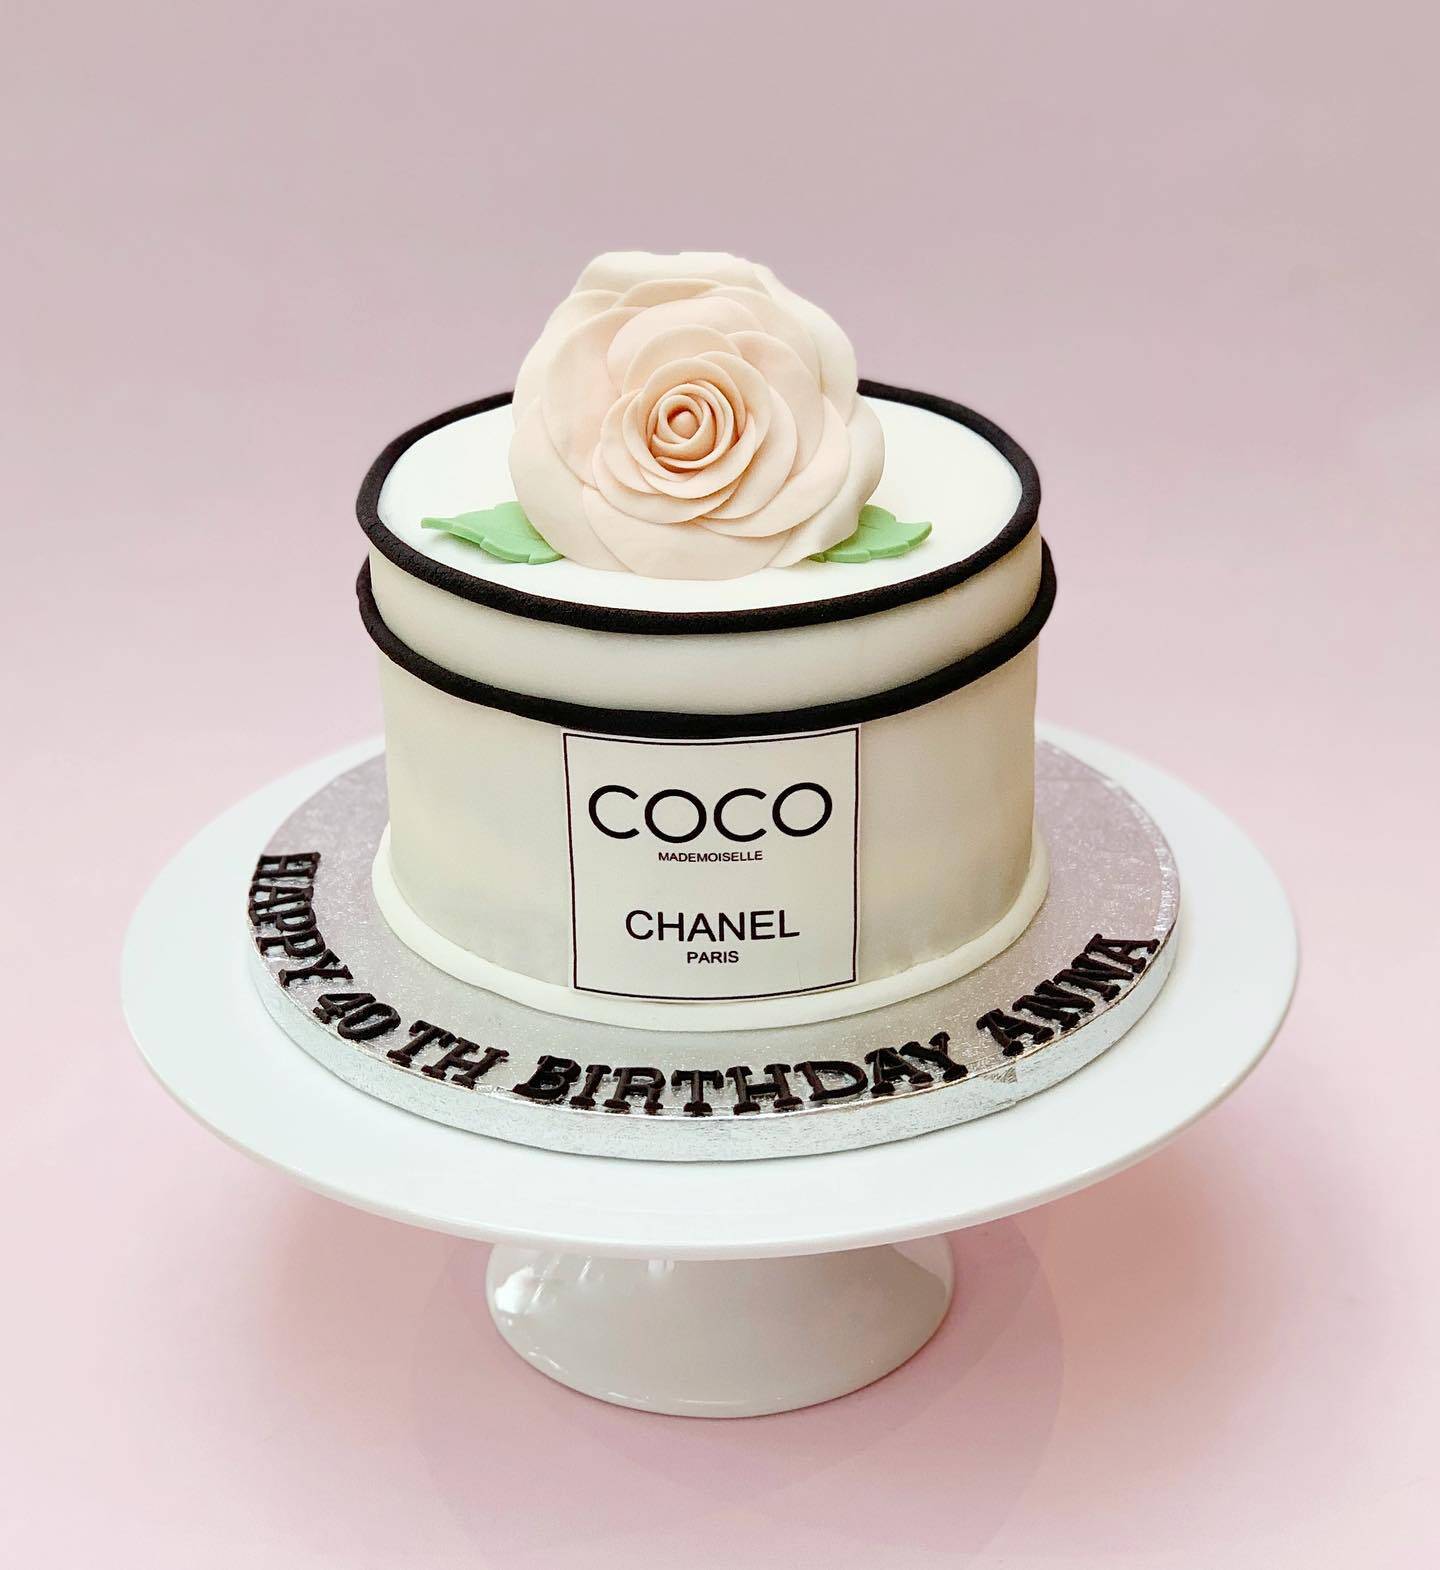 Coco Chanel bespoke Cakes